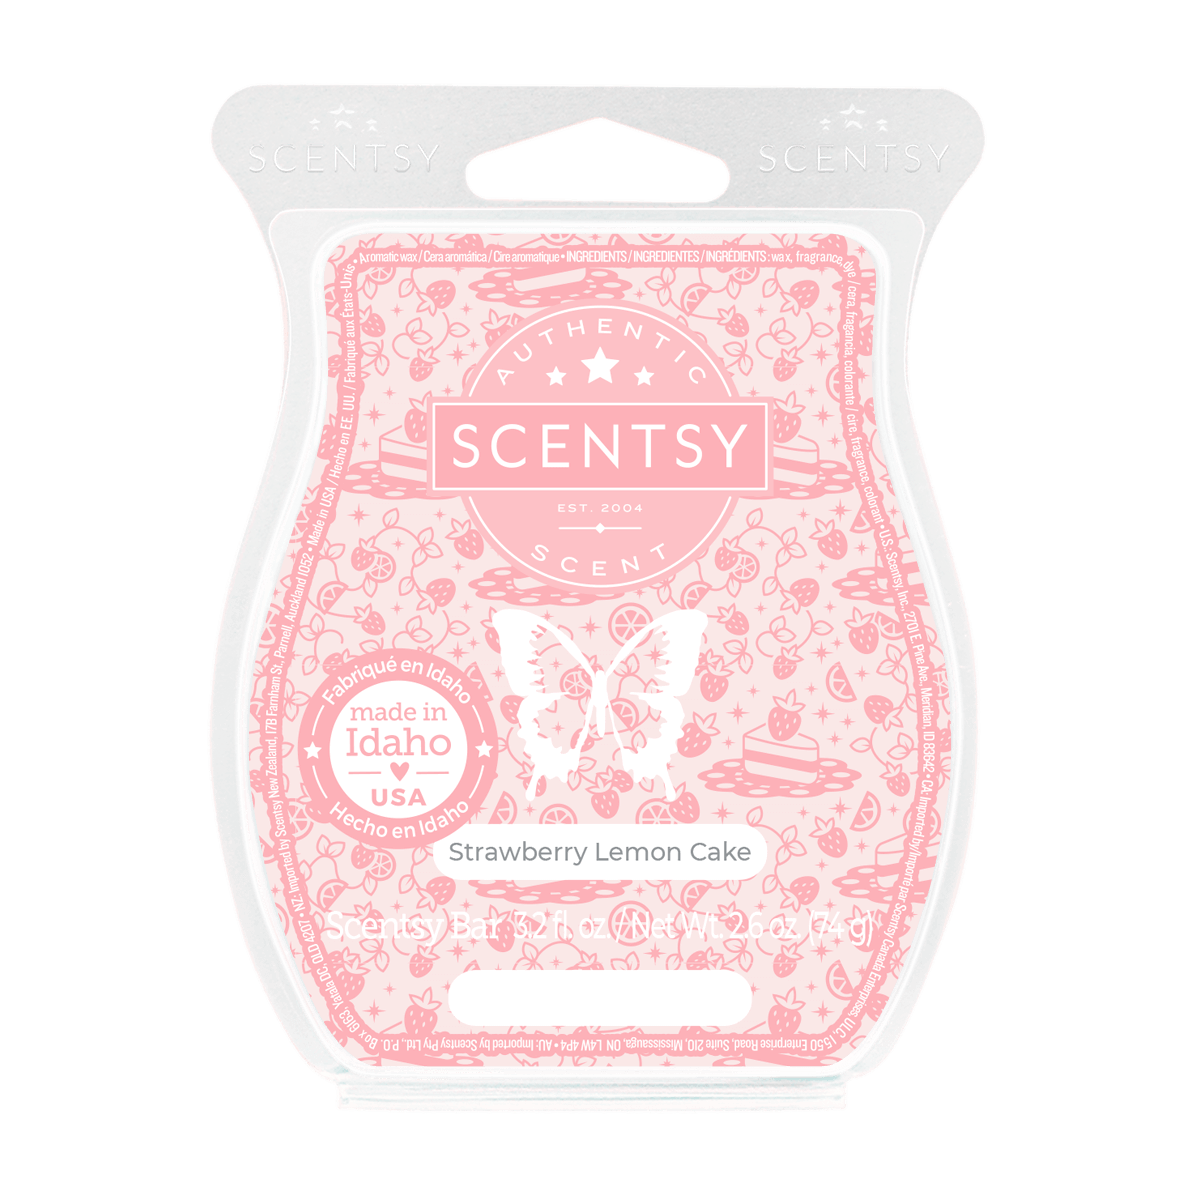 Scentsy - Add this medley of wax and fragrance to a Scentsy Warmer